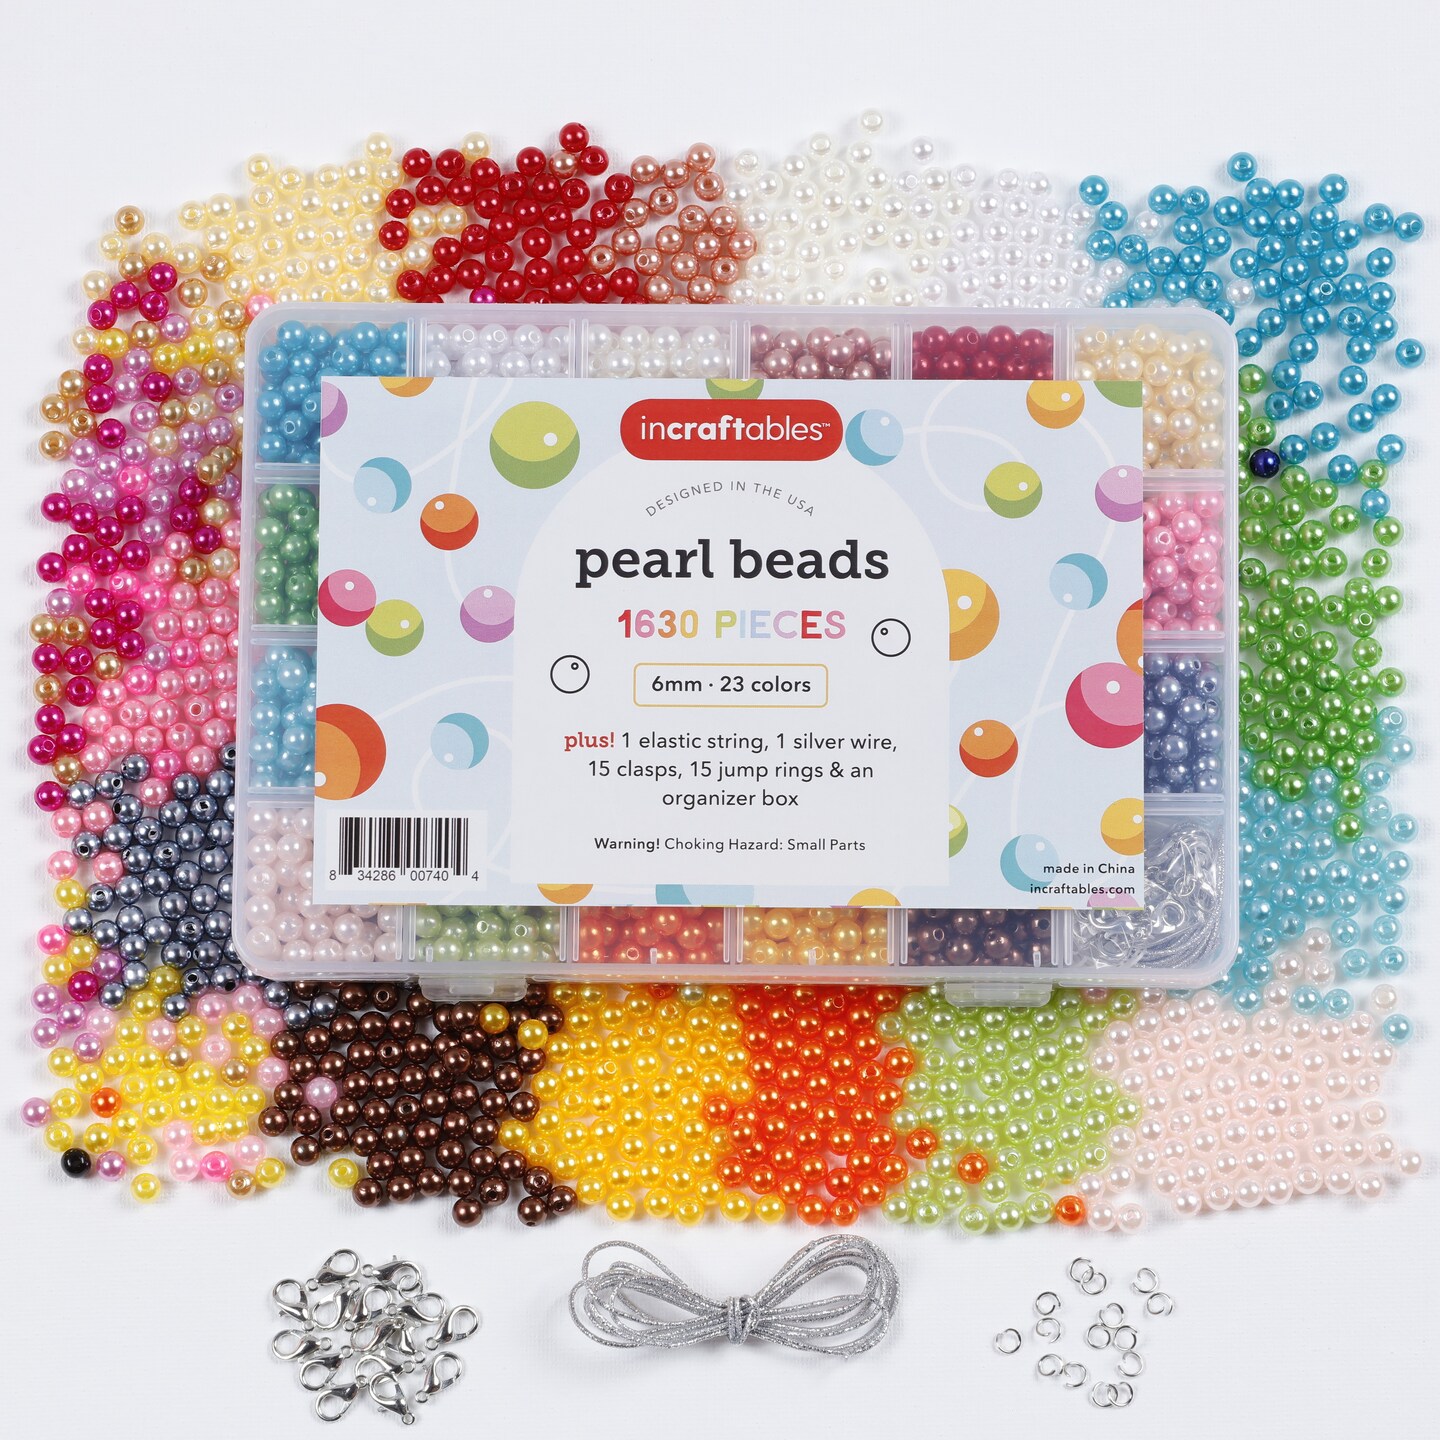 LUTER 770pcs Pearl Beads for Bracelets Making, Round Pearls Beads Craft Kit  with Storage Box Accessories Beads for Bracelet Making Ornament Craft